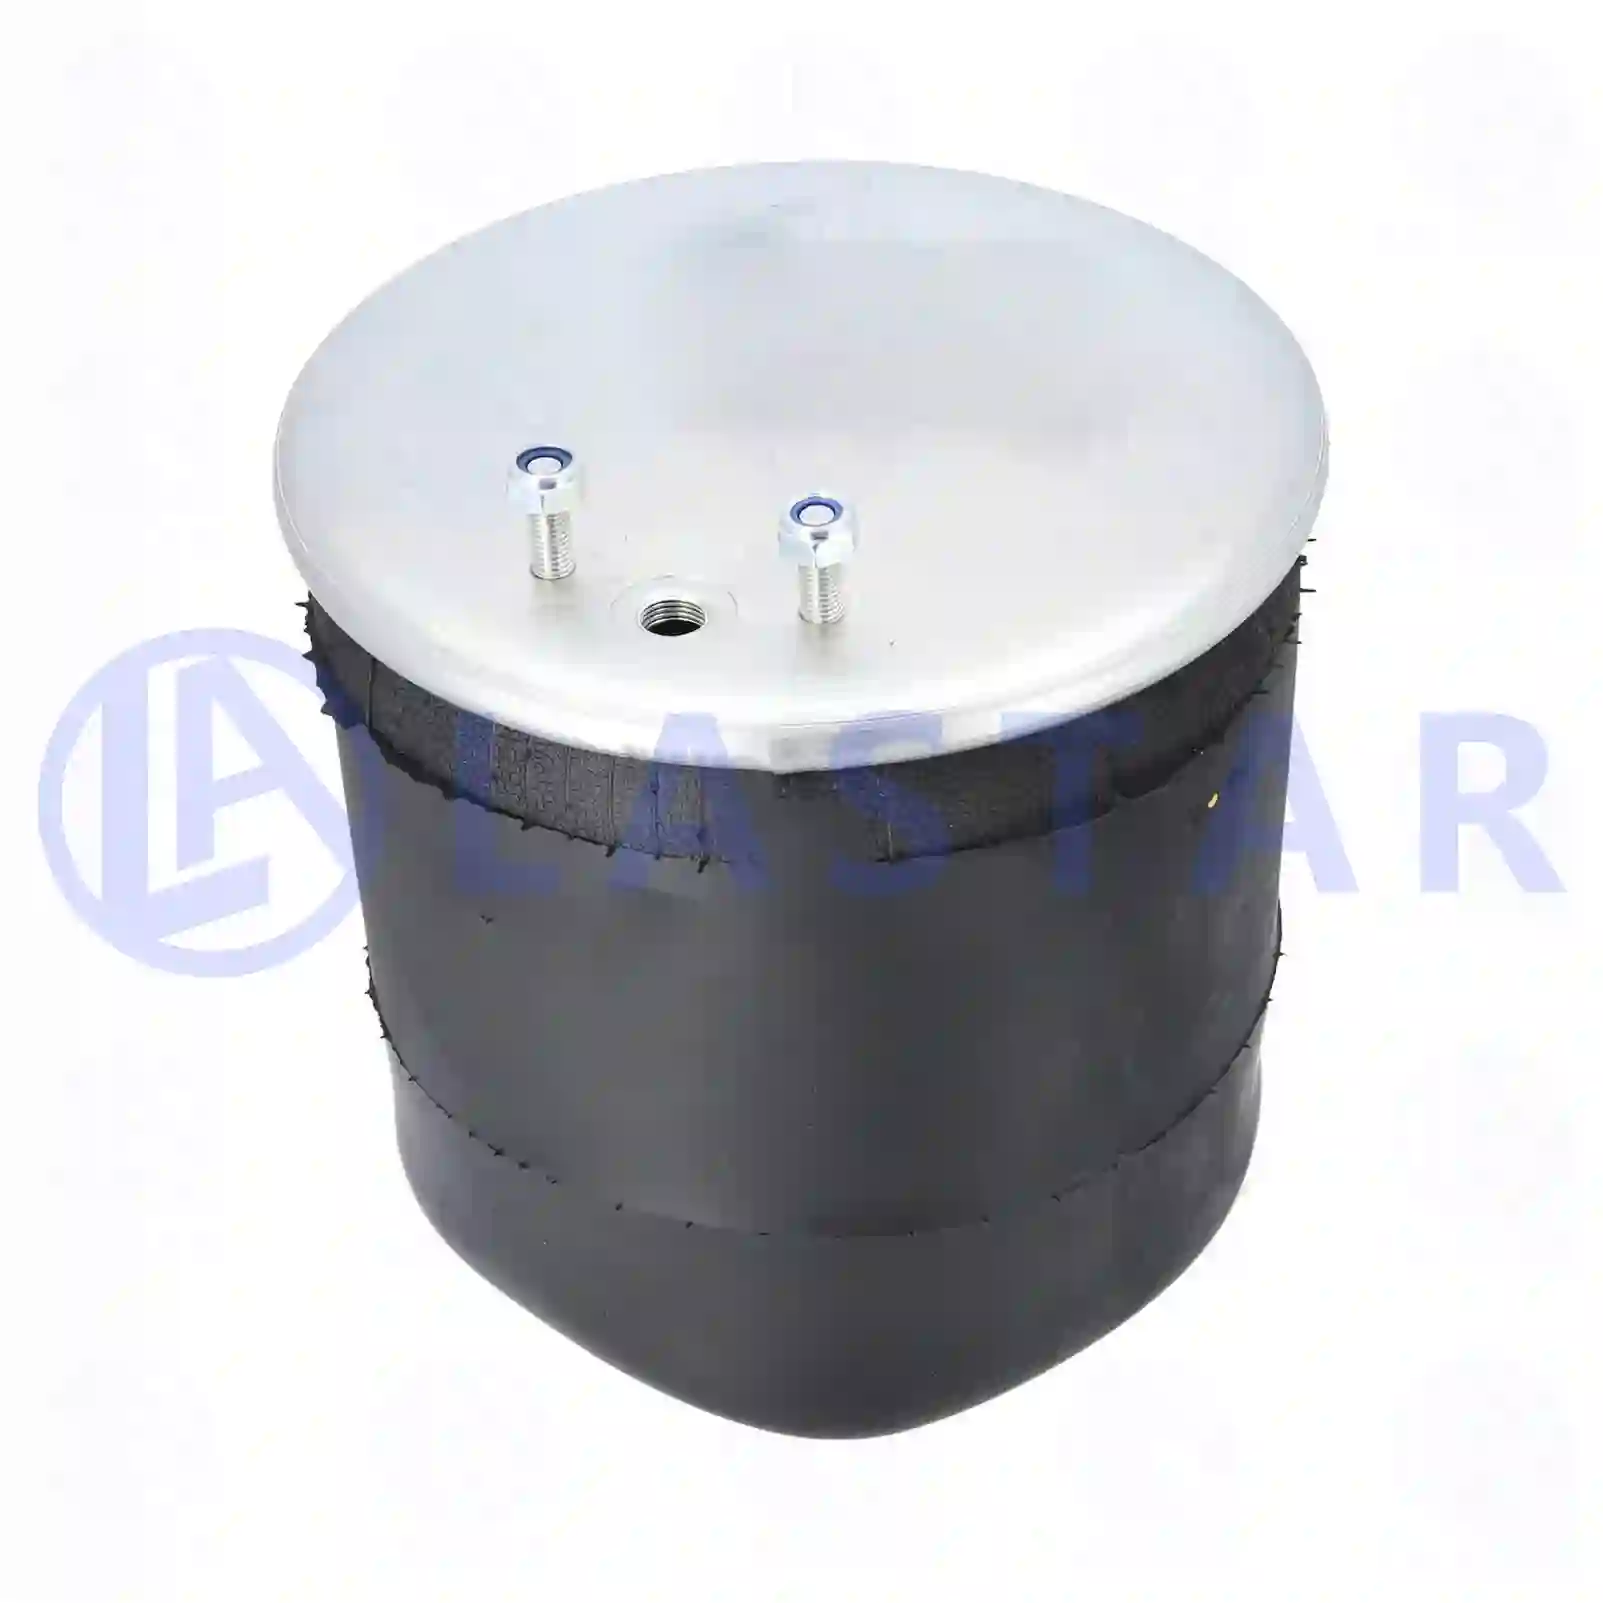 Air spring, with steel piston, 77727161, MLF7098, 1076594, 20554755, ZG40755-0008, , ||  77727161 Lastar Spare Part | Truck Spare Parts, Auotomotive Spare Parts Air spring, with steel piston, 77727161, MLF7098, 1076594, 20554755, ZG40755-0008, , ||  77727161 Lastar Spare Part | Truck Spare Parts, Auotomotive Spare Parts